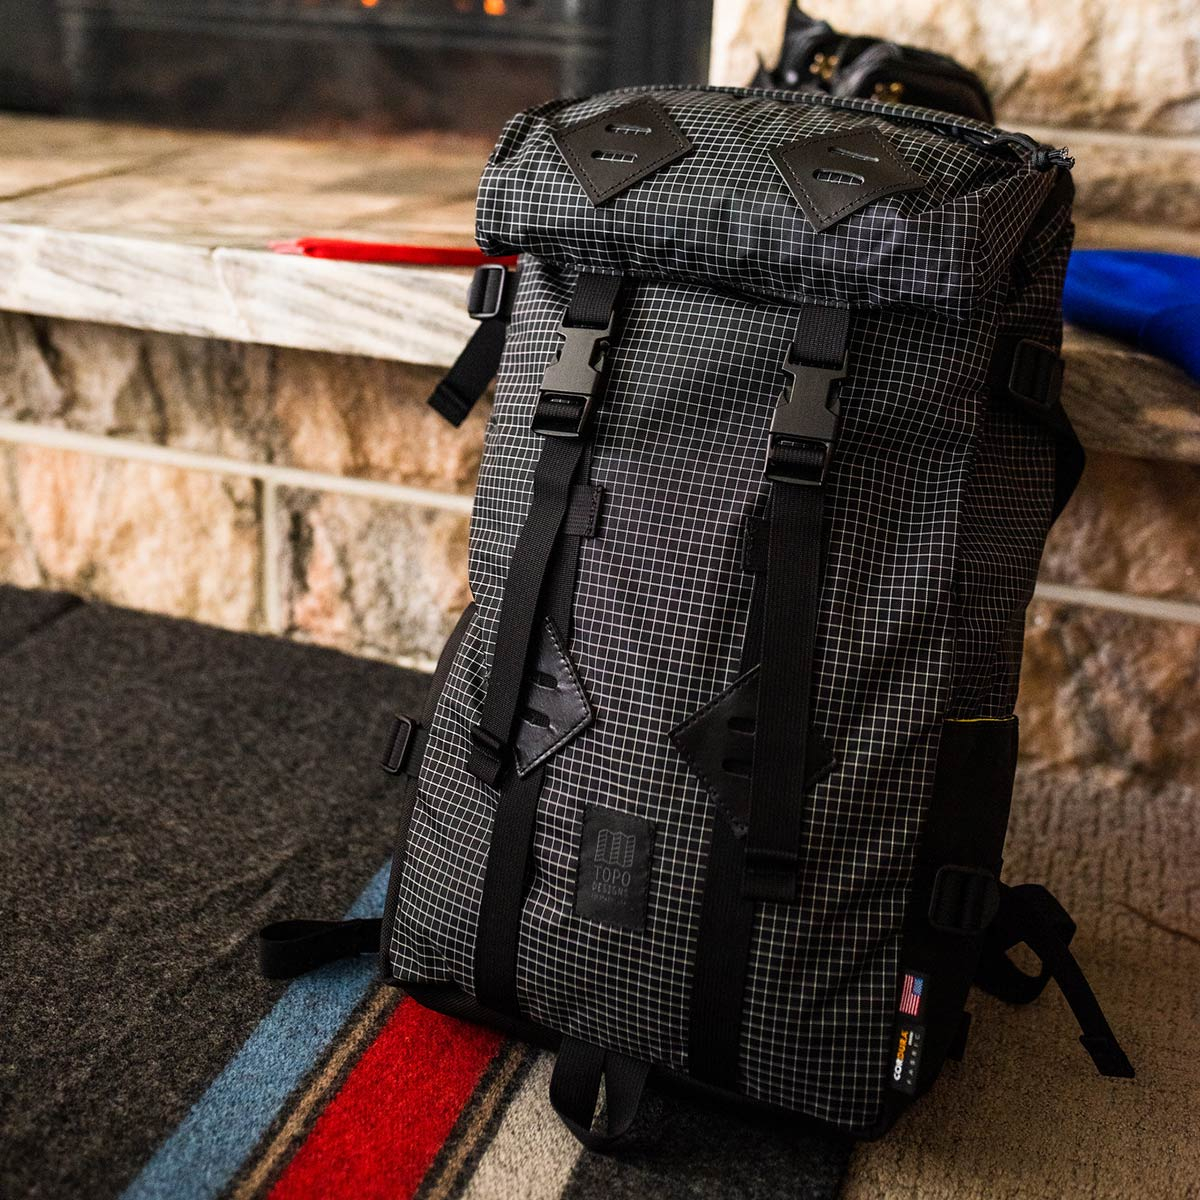 Topo Designs Klettersack Black/White Ripstop at the fireplace